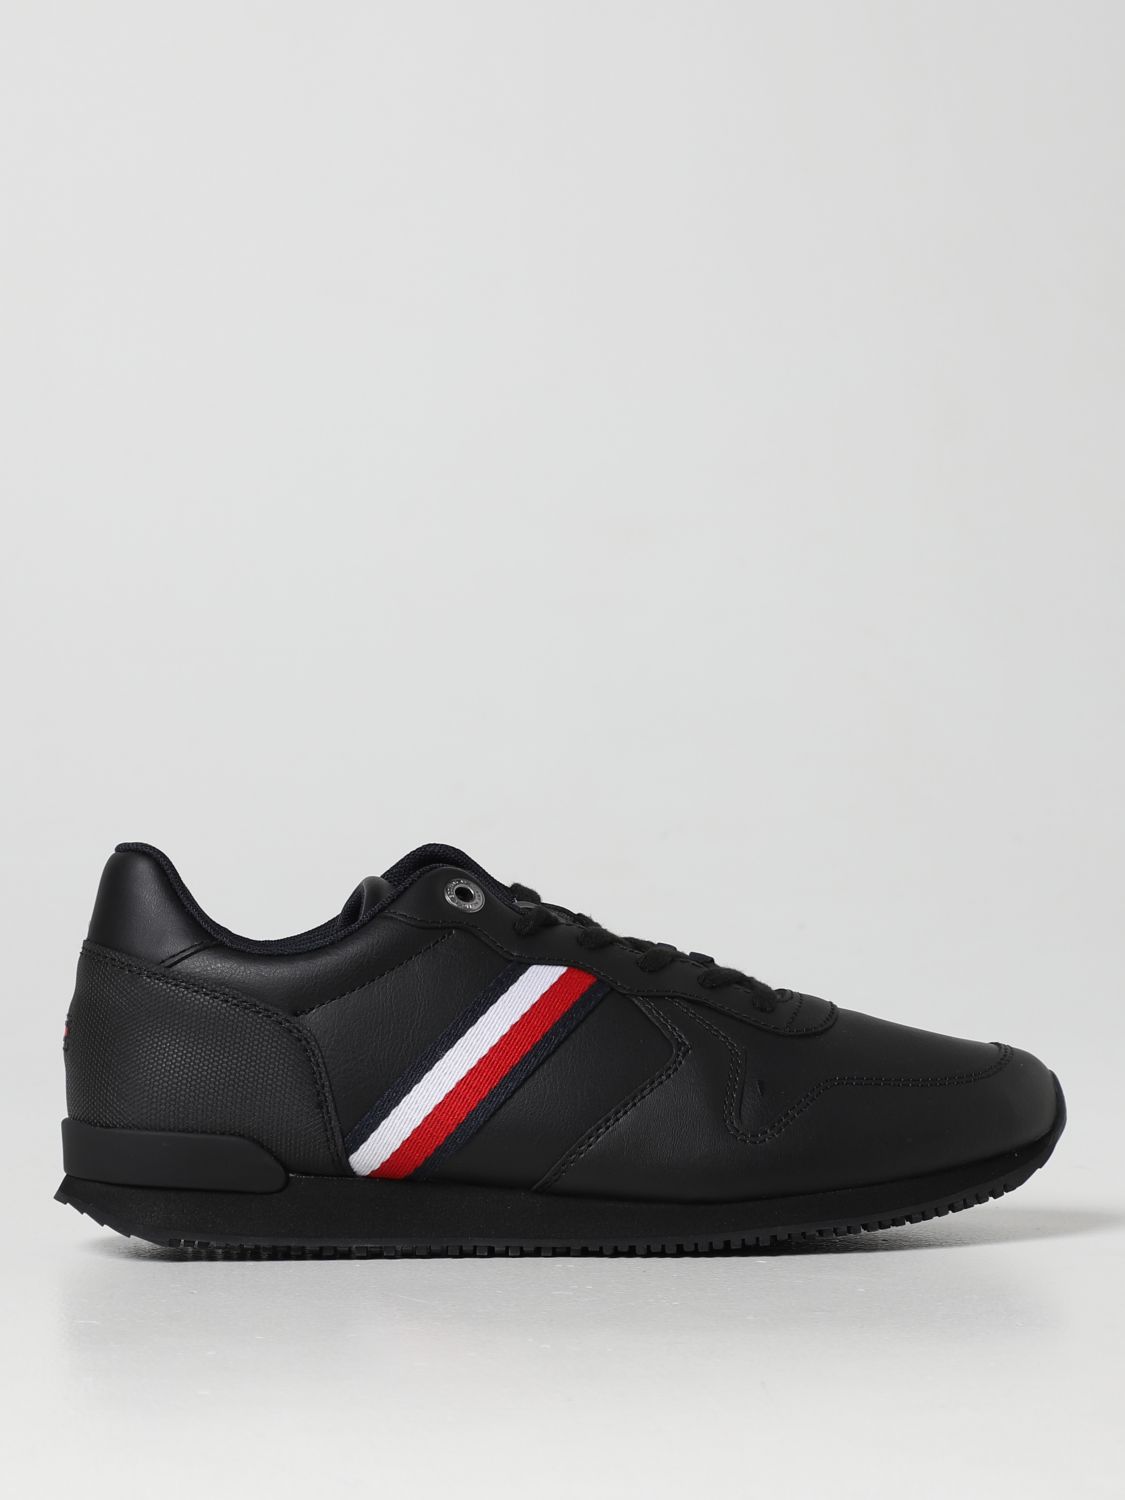 pipeline Annihilate Passed TOMMY HILFIGER: Iconic Runner leather sneakers - Black | Tommy Hilfiger  sneakers FM0FM04281 online on GIGLIO.COM